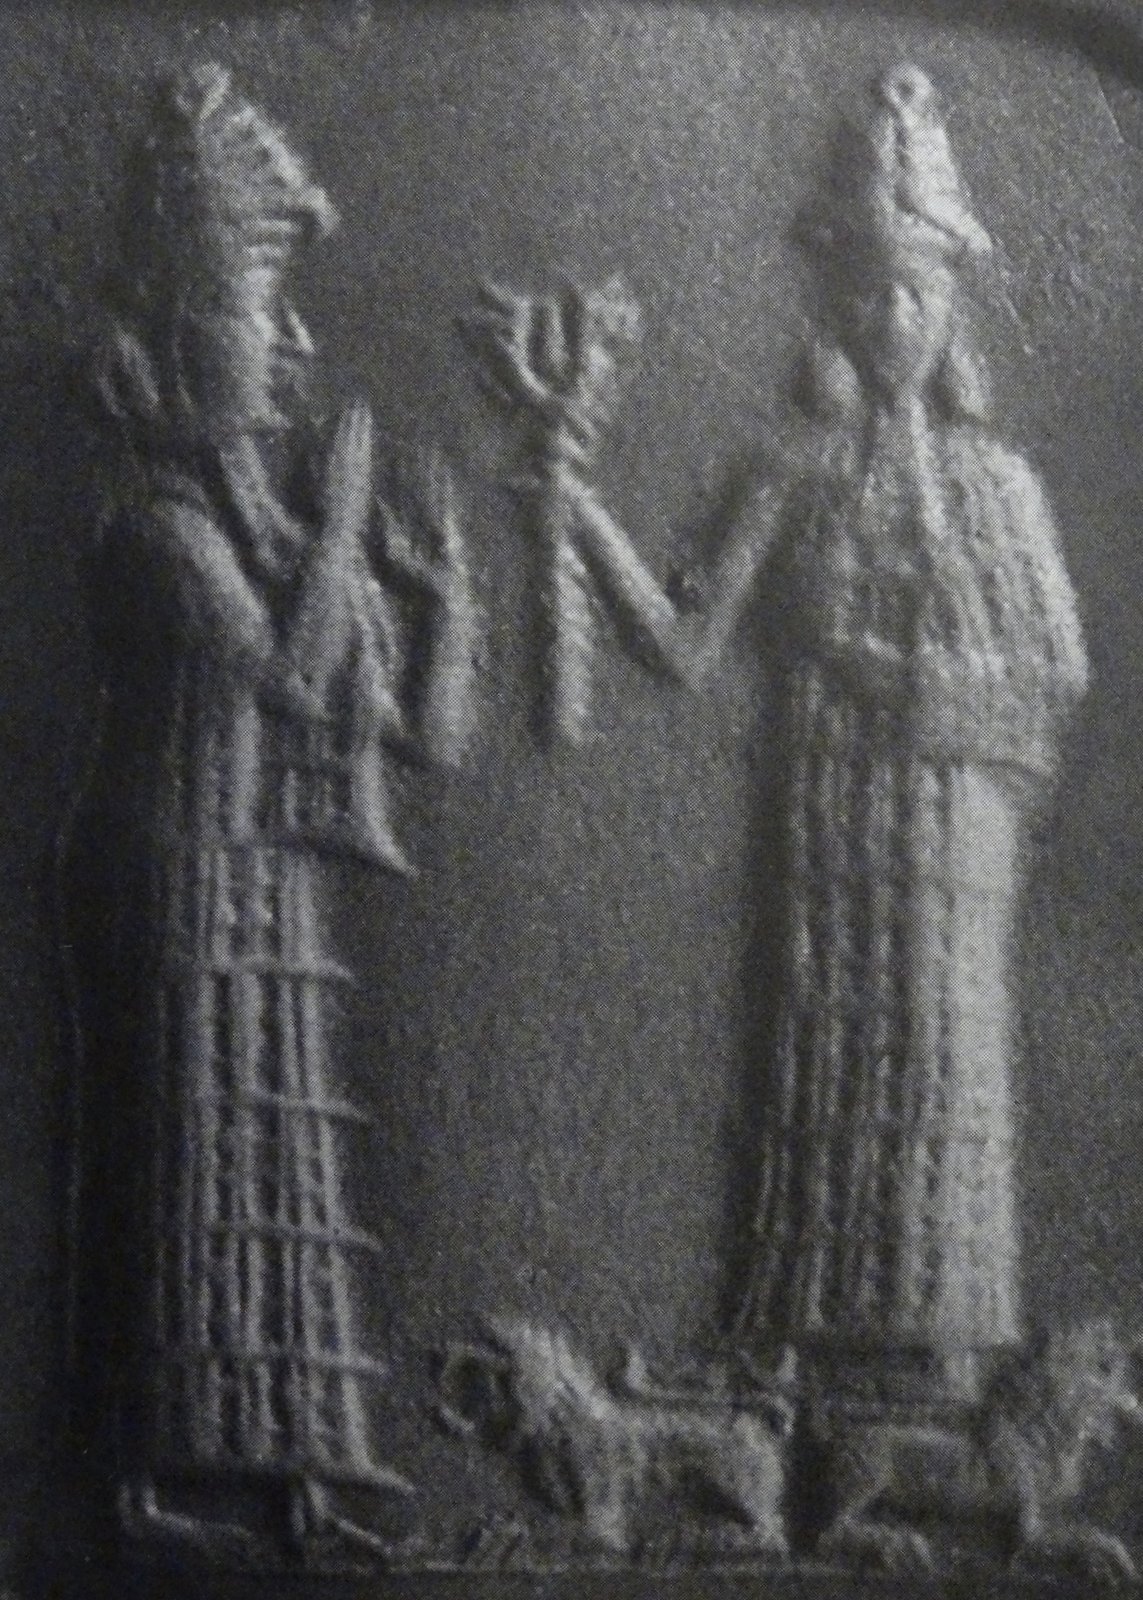 42 - Ninsun & daughter-in-law by way of many son-kings, Inanna